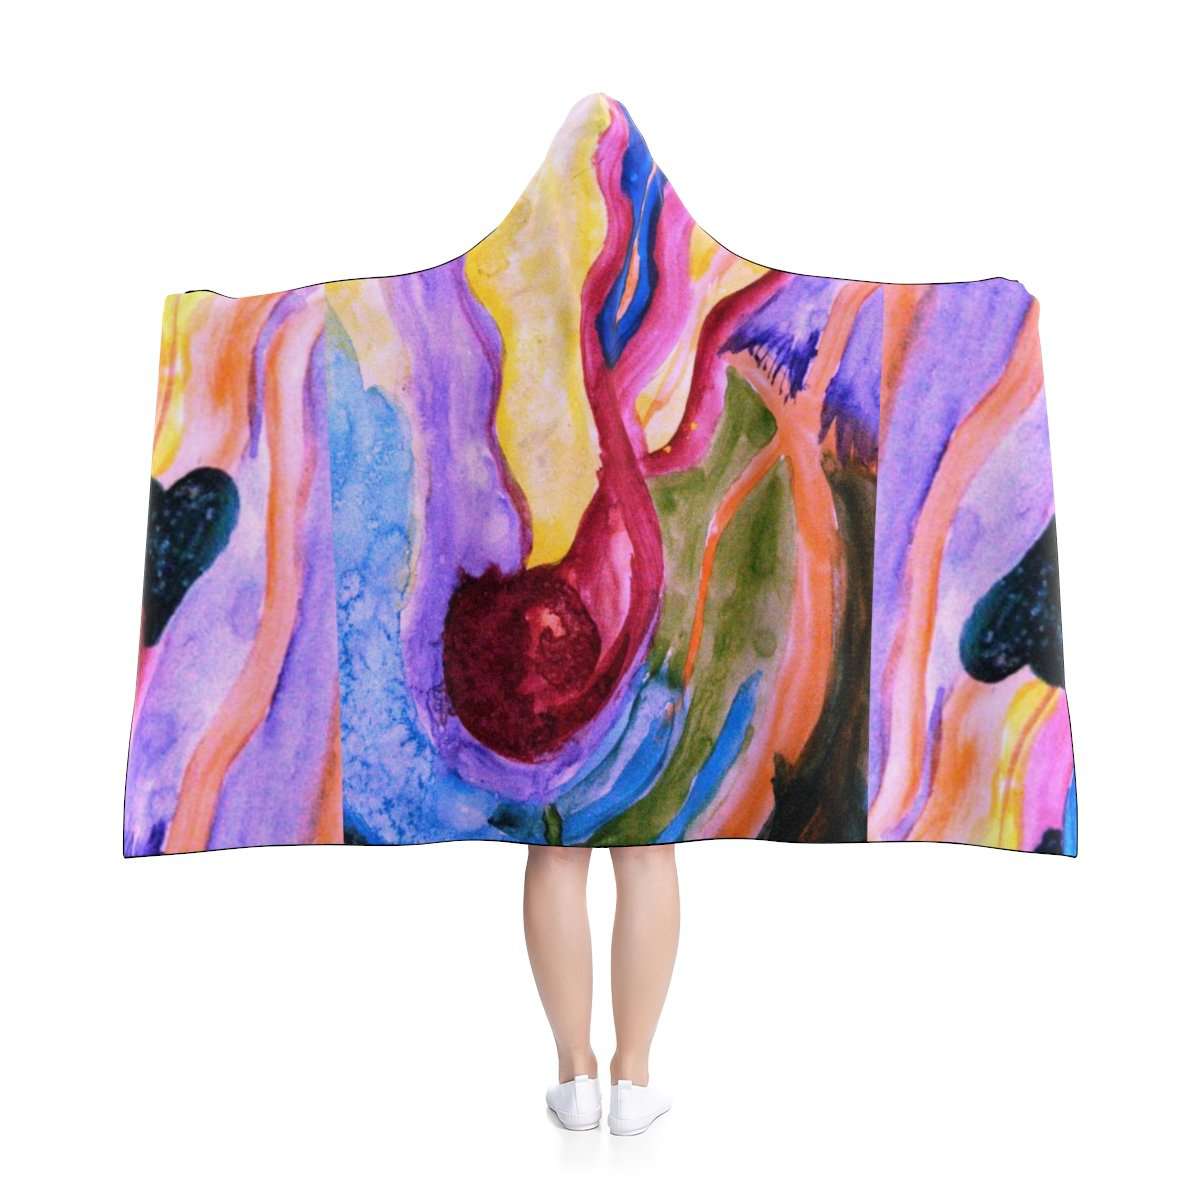 official-store-of-the-maternity-hooded-blanket-online-sale_0.jpg